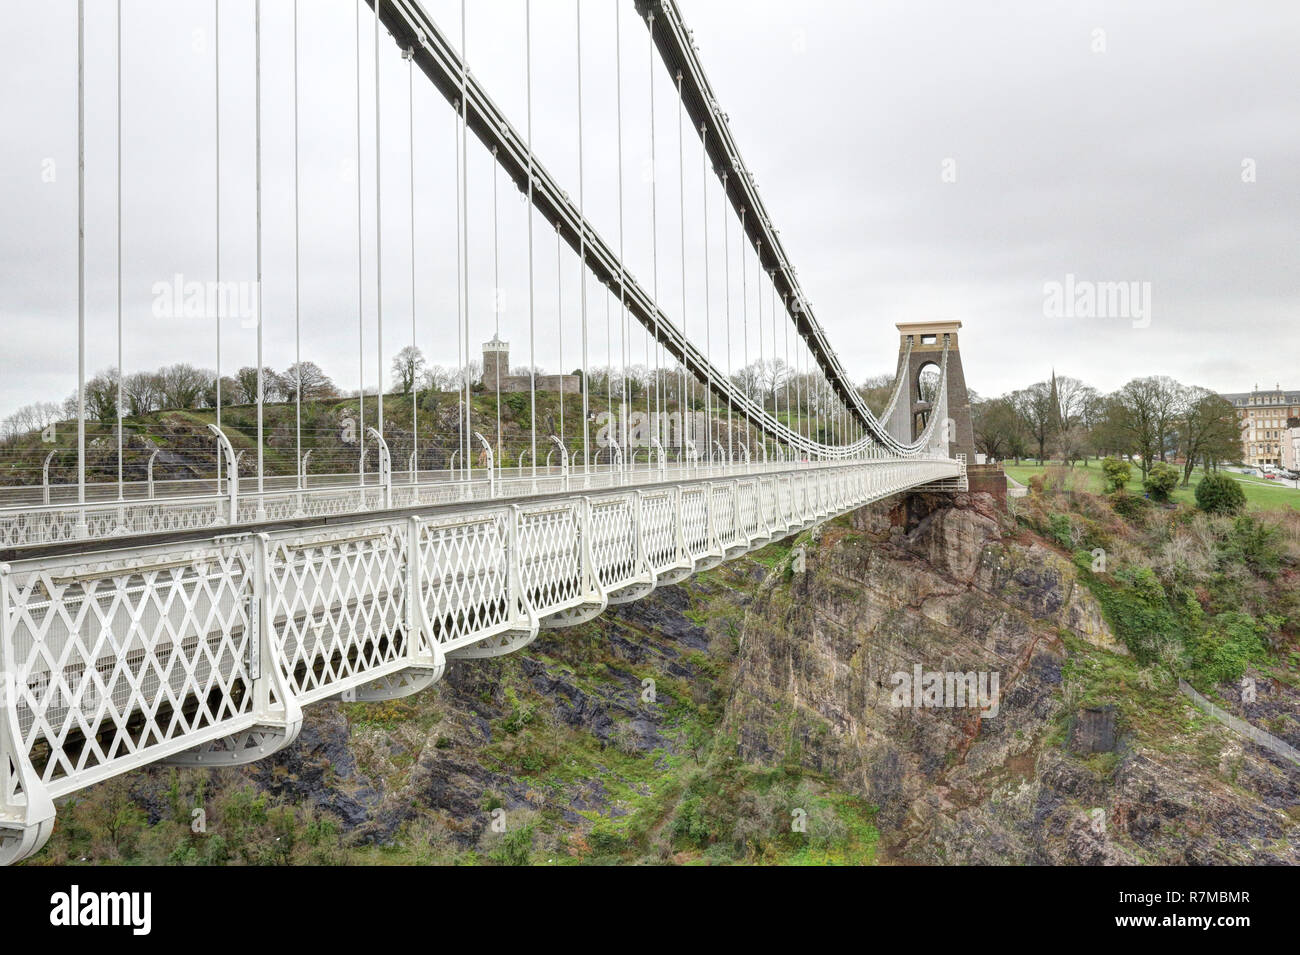 The deck, the suspender and main cables and the tower of the Clifton Suspension Bridge over the Avon river in Bristol, United Kingdom Stock Photo